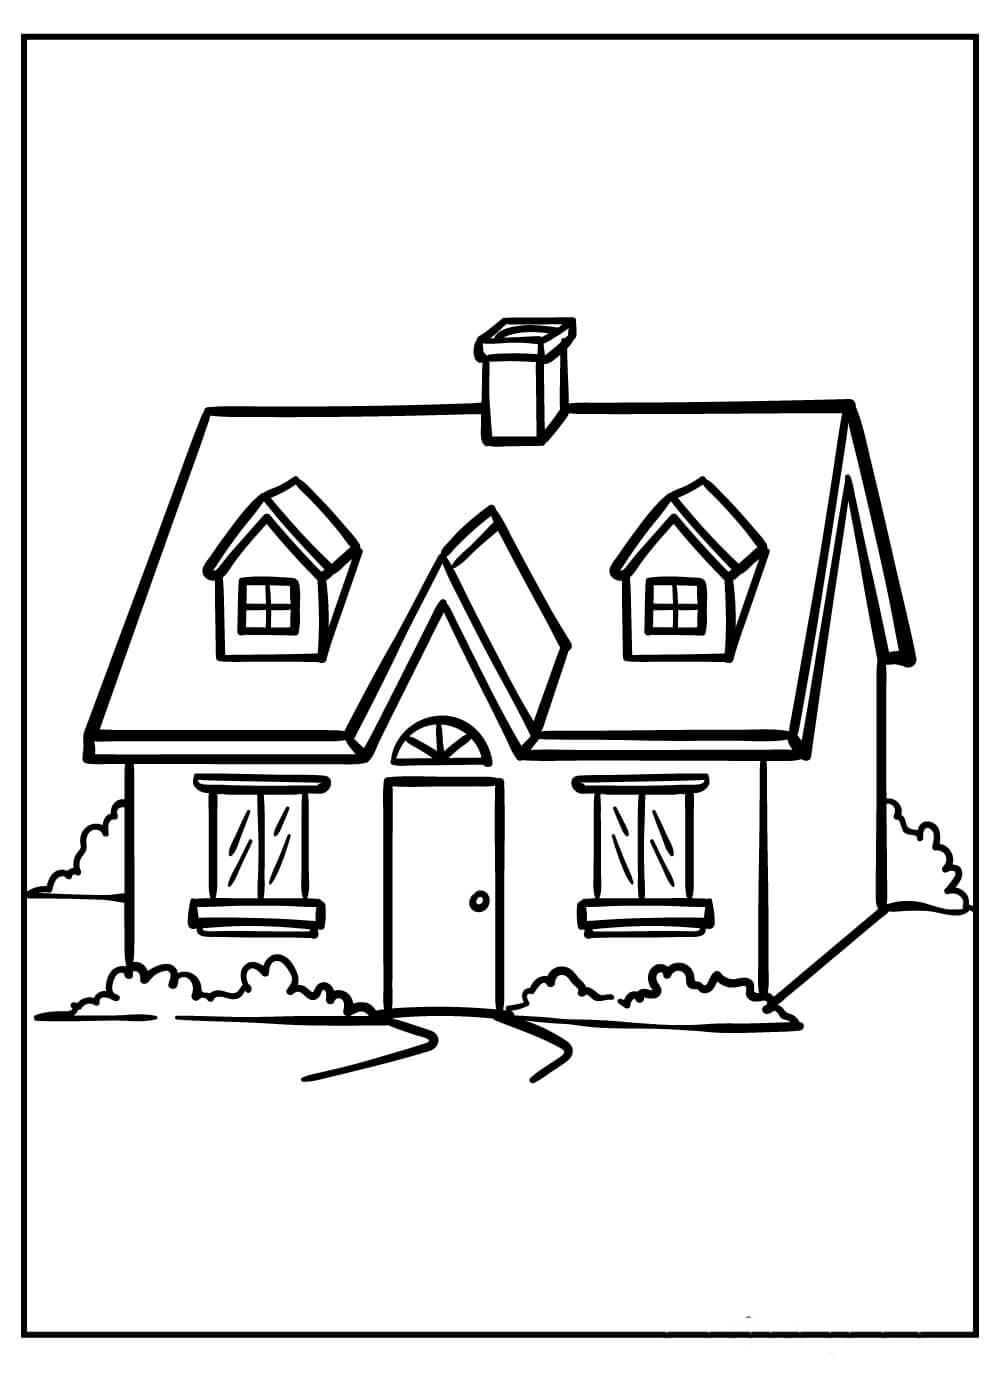 Maison Normale coloring page